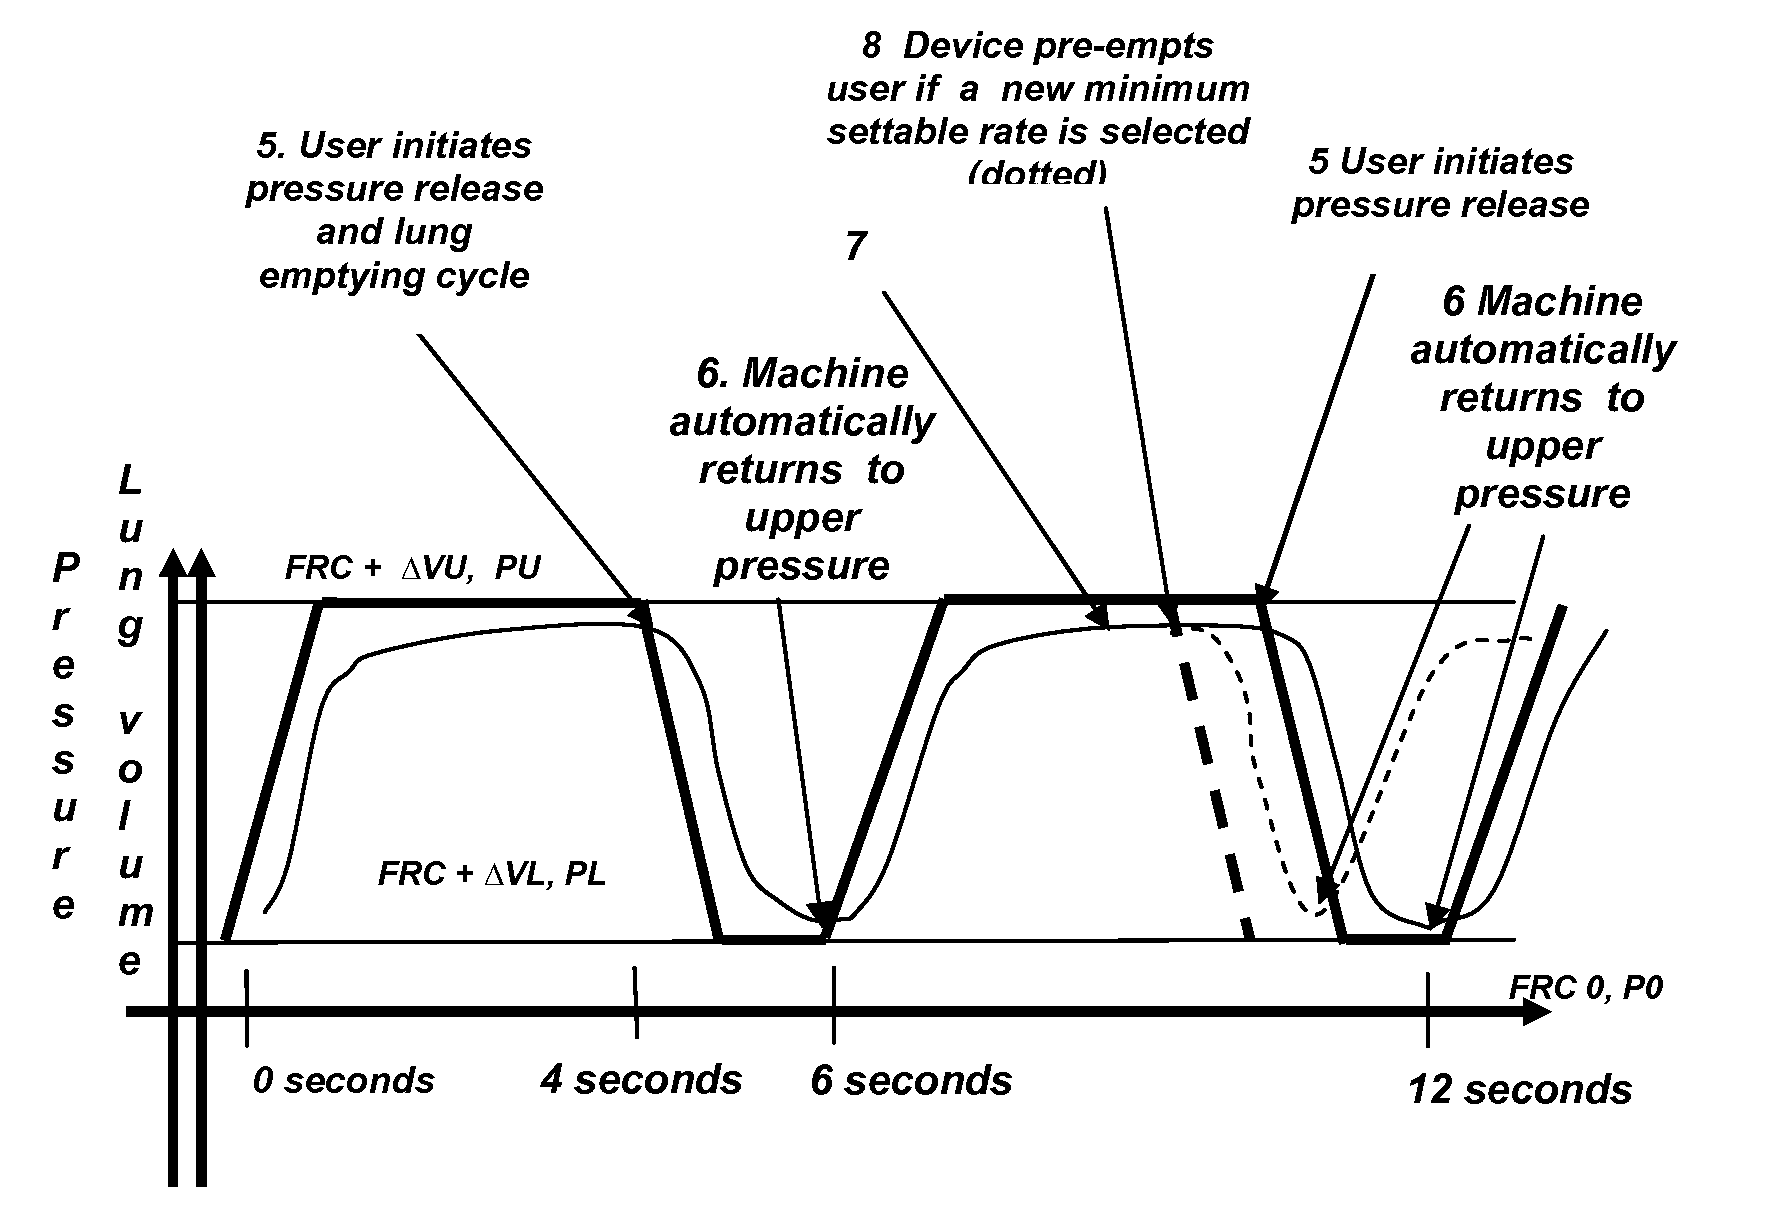 Automatic Positive Airway Pressure Therapy through the Nose or Mouth for Treatment of Sleep Apnea and Other Respiratory Disorders